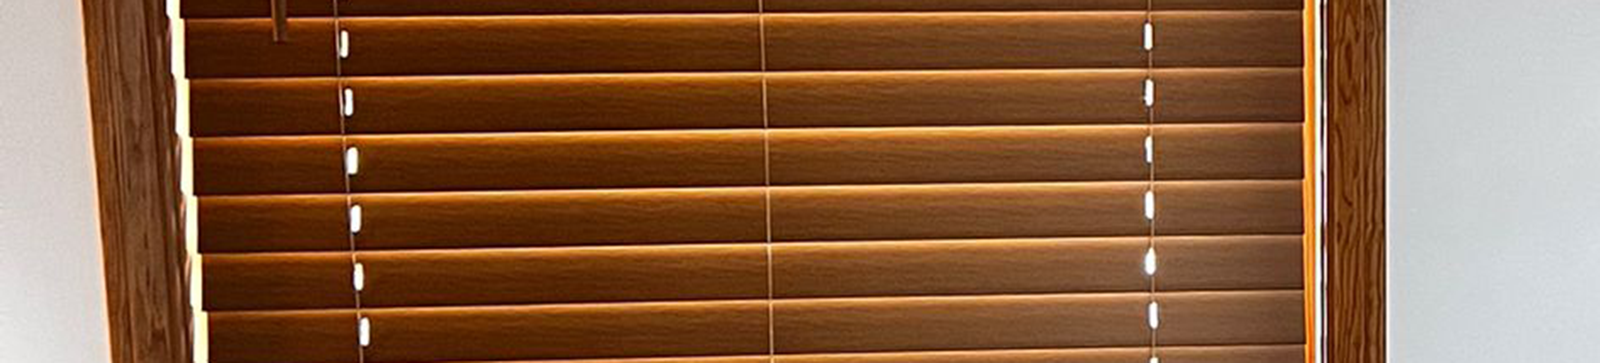 Wood Blinds Installation in San Anselmo